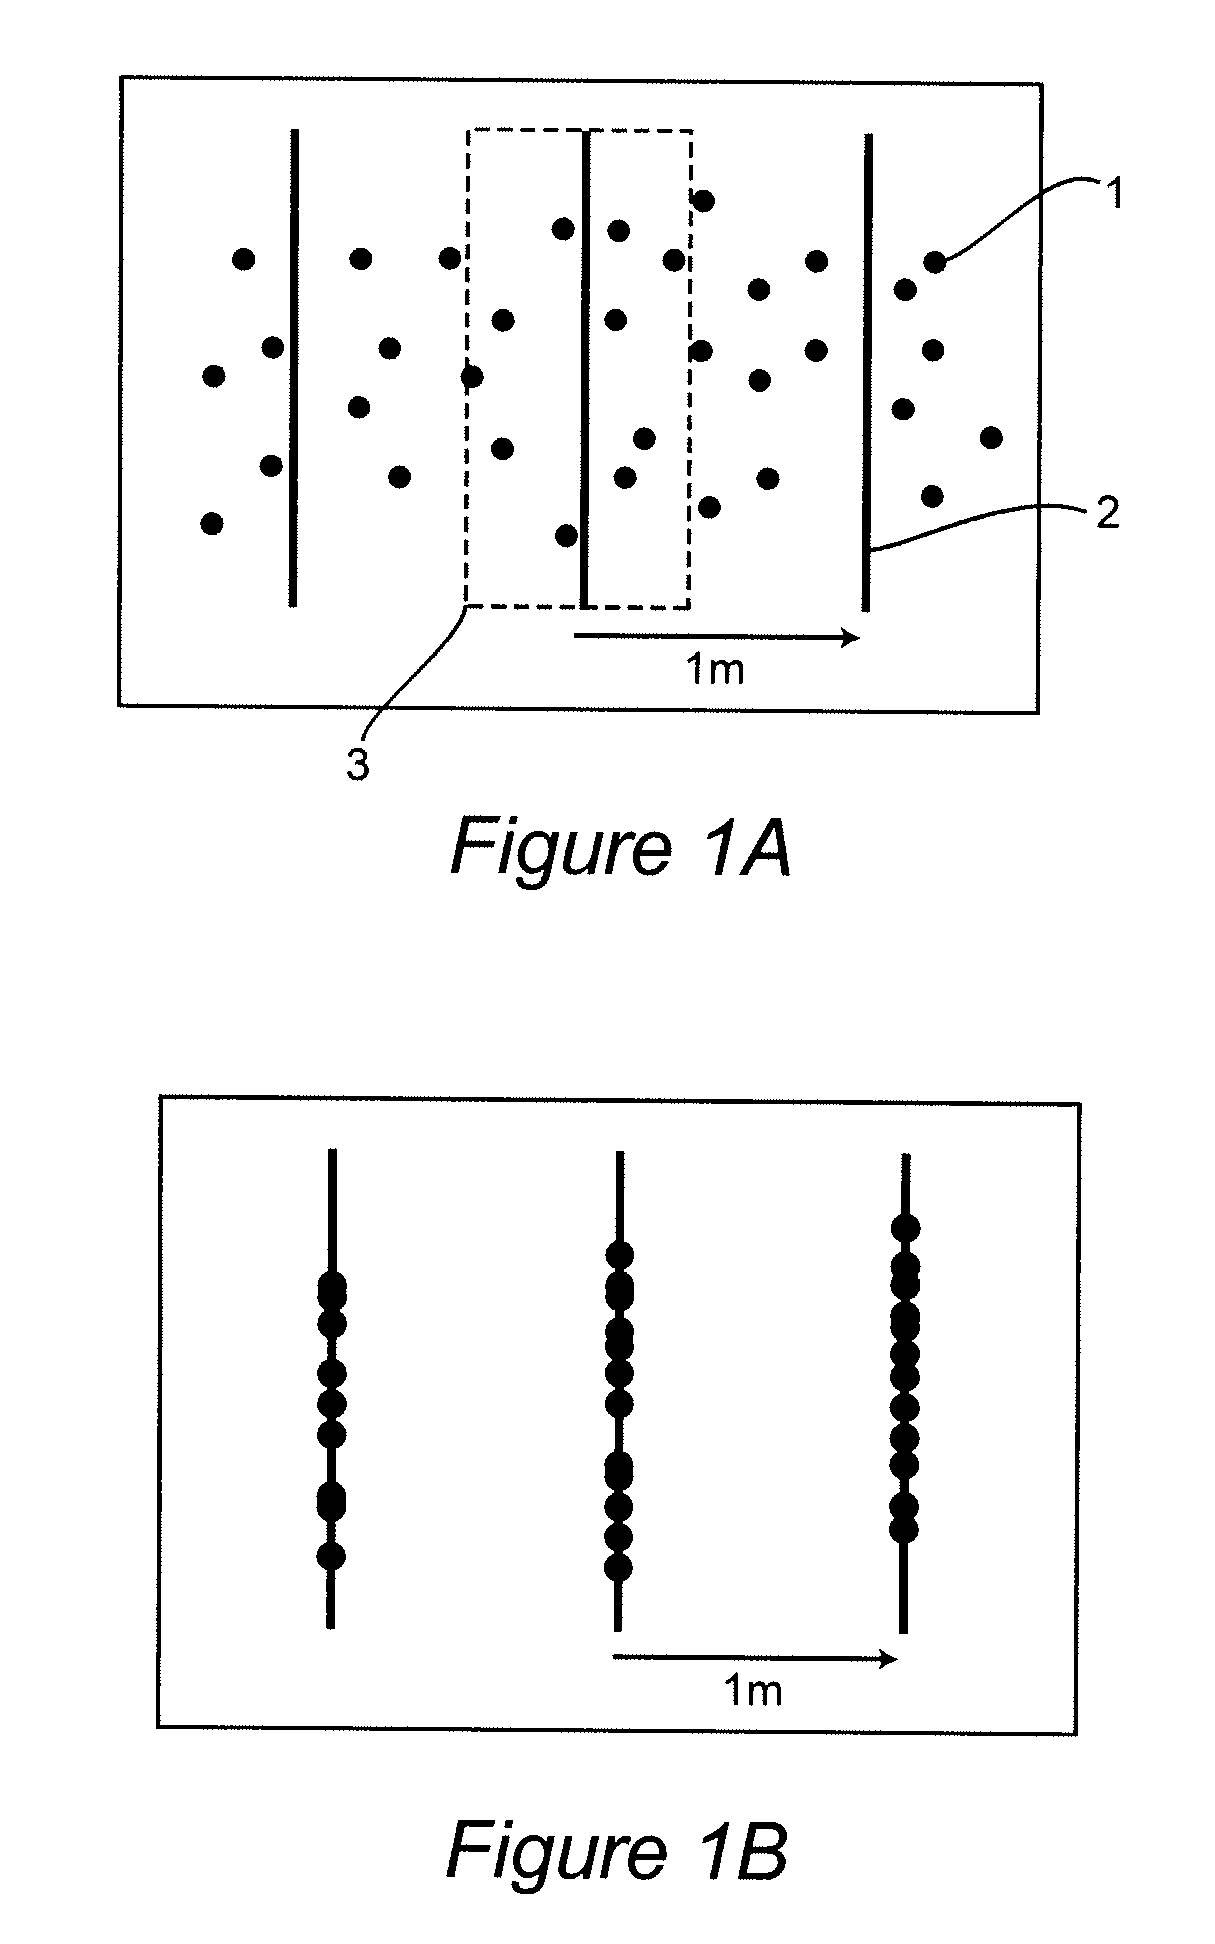 Method for determining a highly accurate position of routes and/or objects